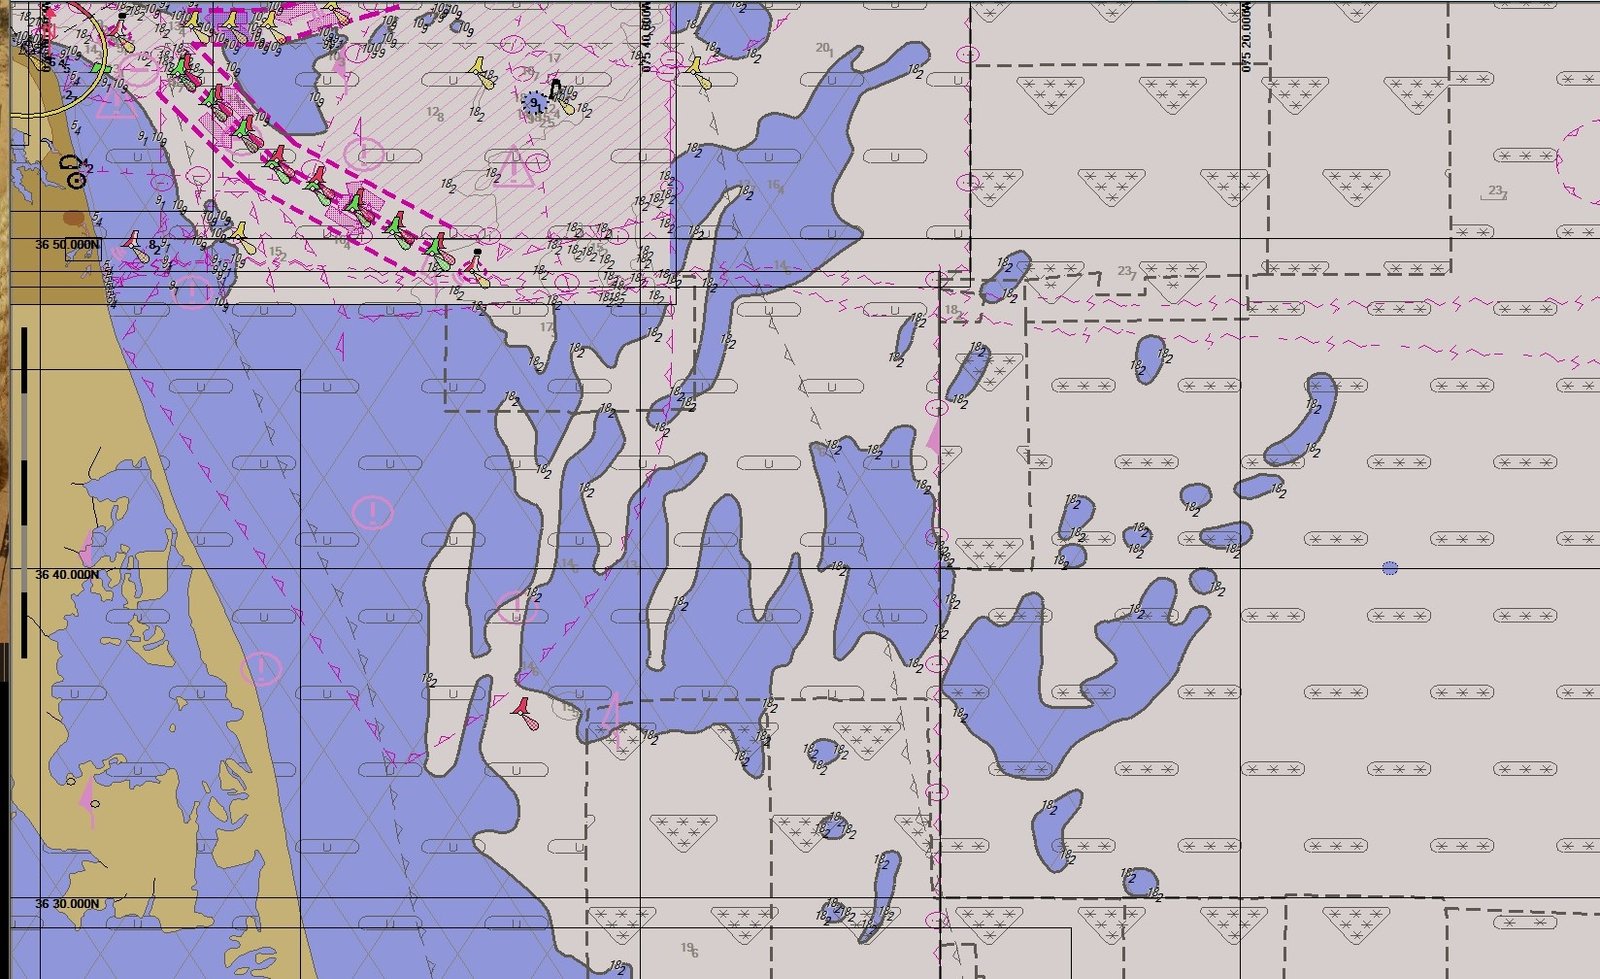 Approaches to Chesapeake Bay on ECDIS